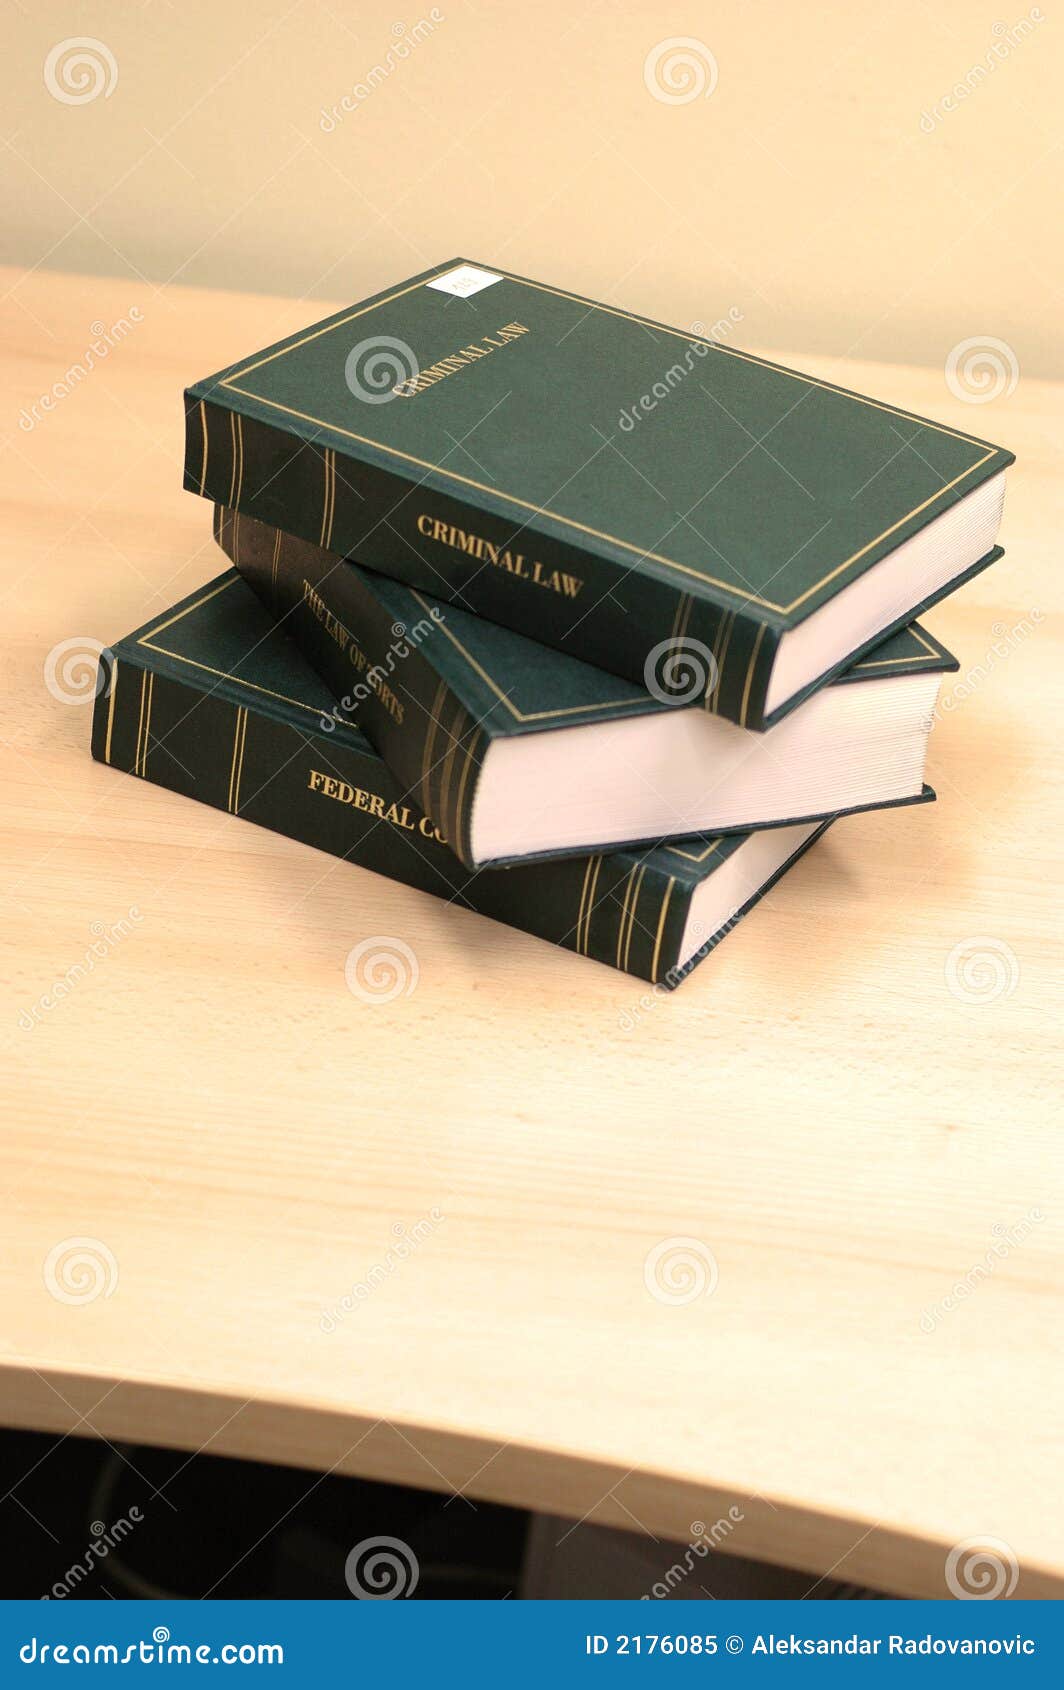 Books On Table Royalty Free Stock Photo - Image: 2176085